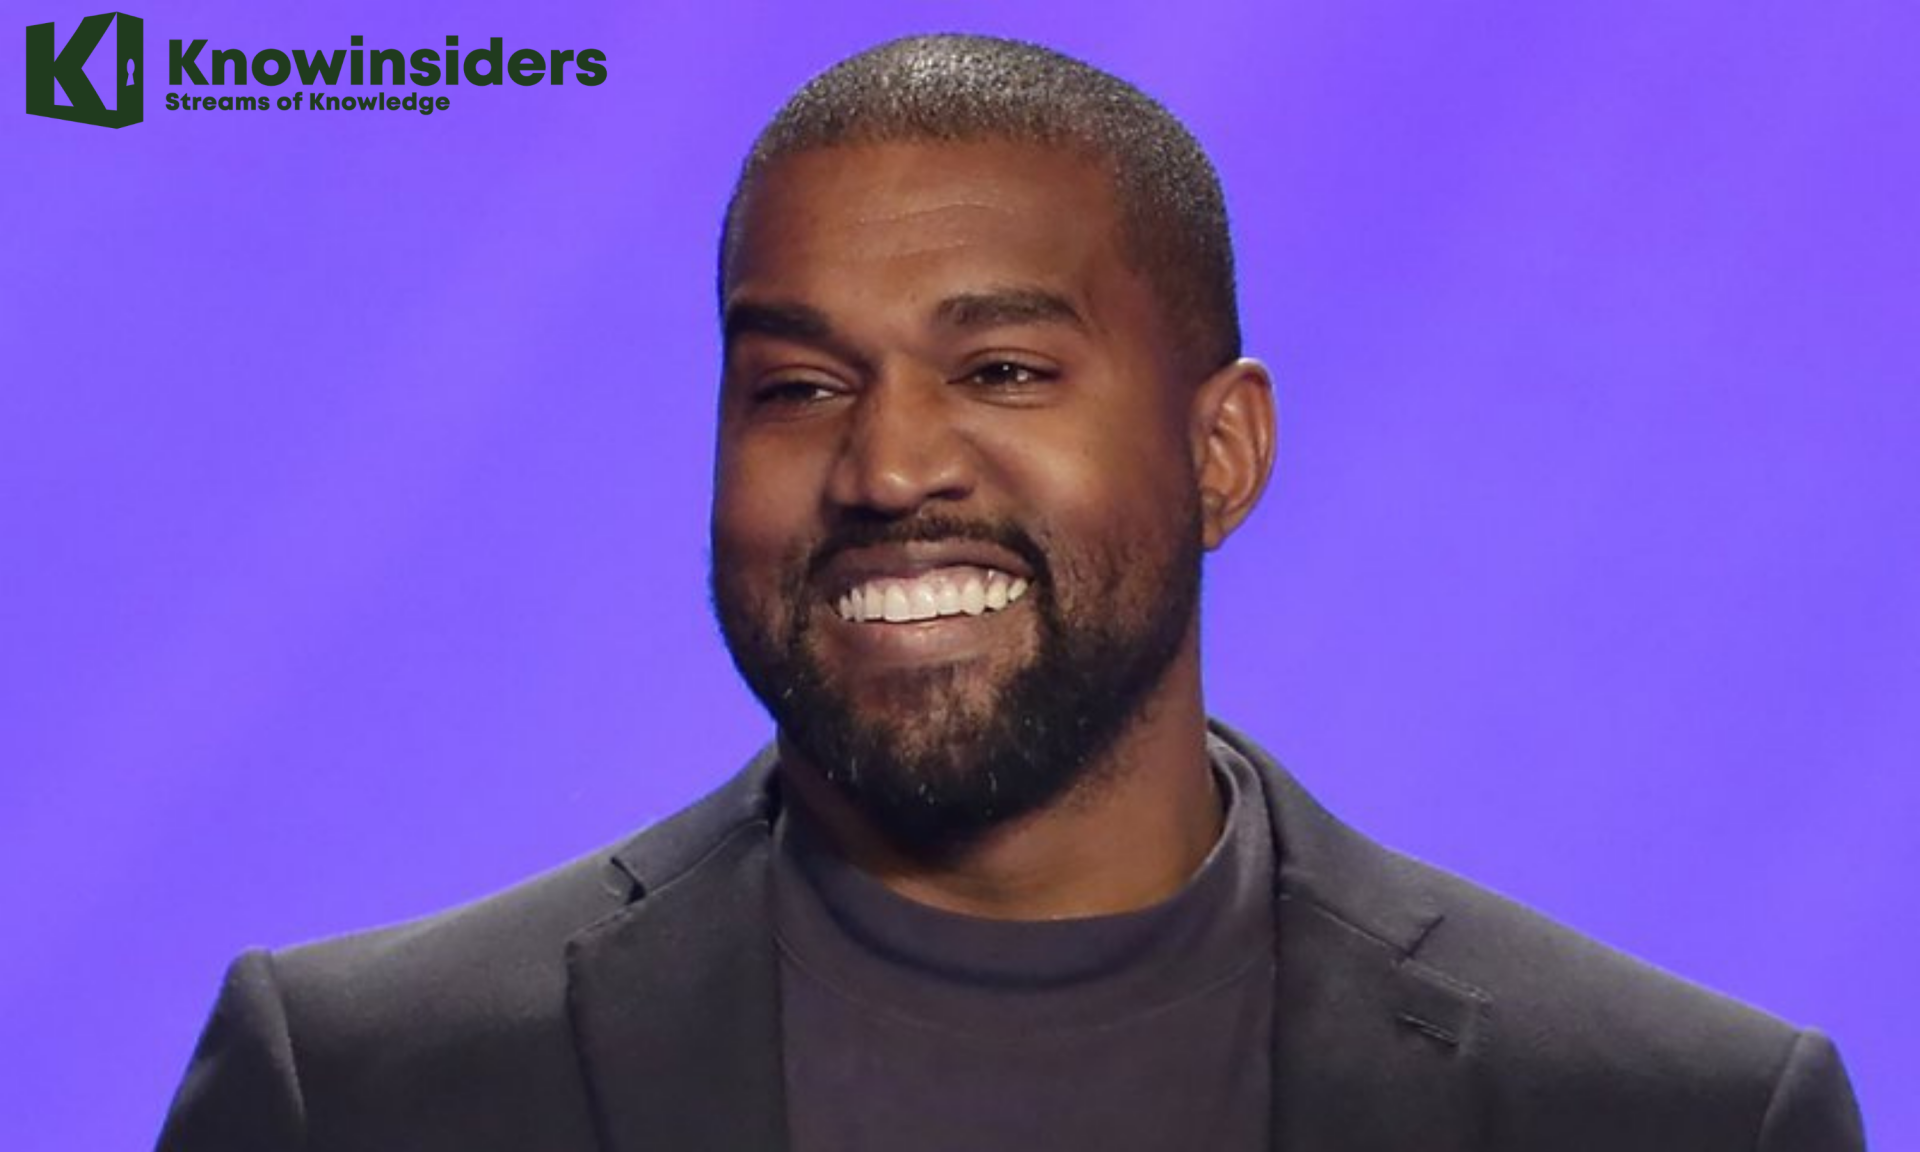 Who is Kanye West: The Richest Musician In The World